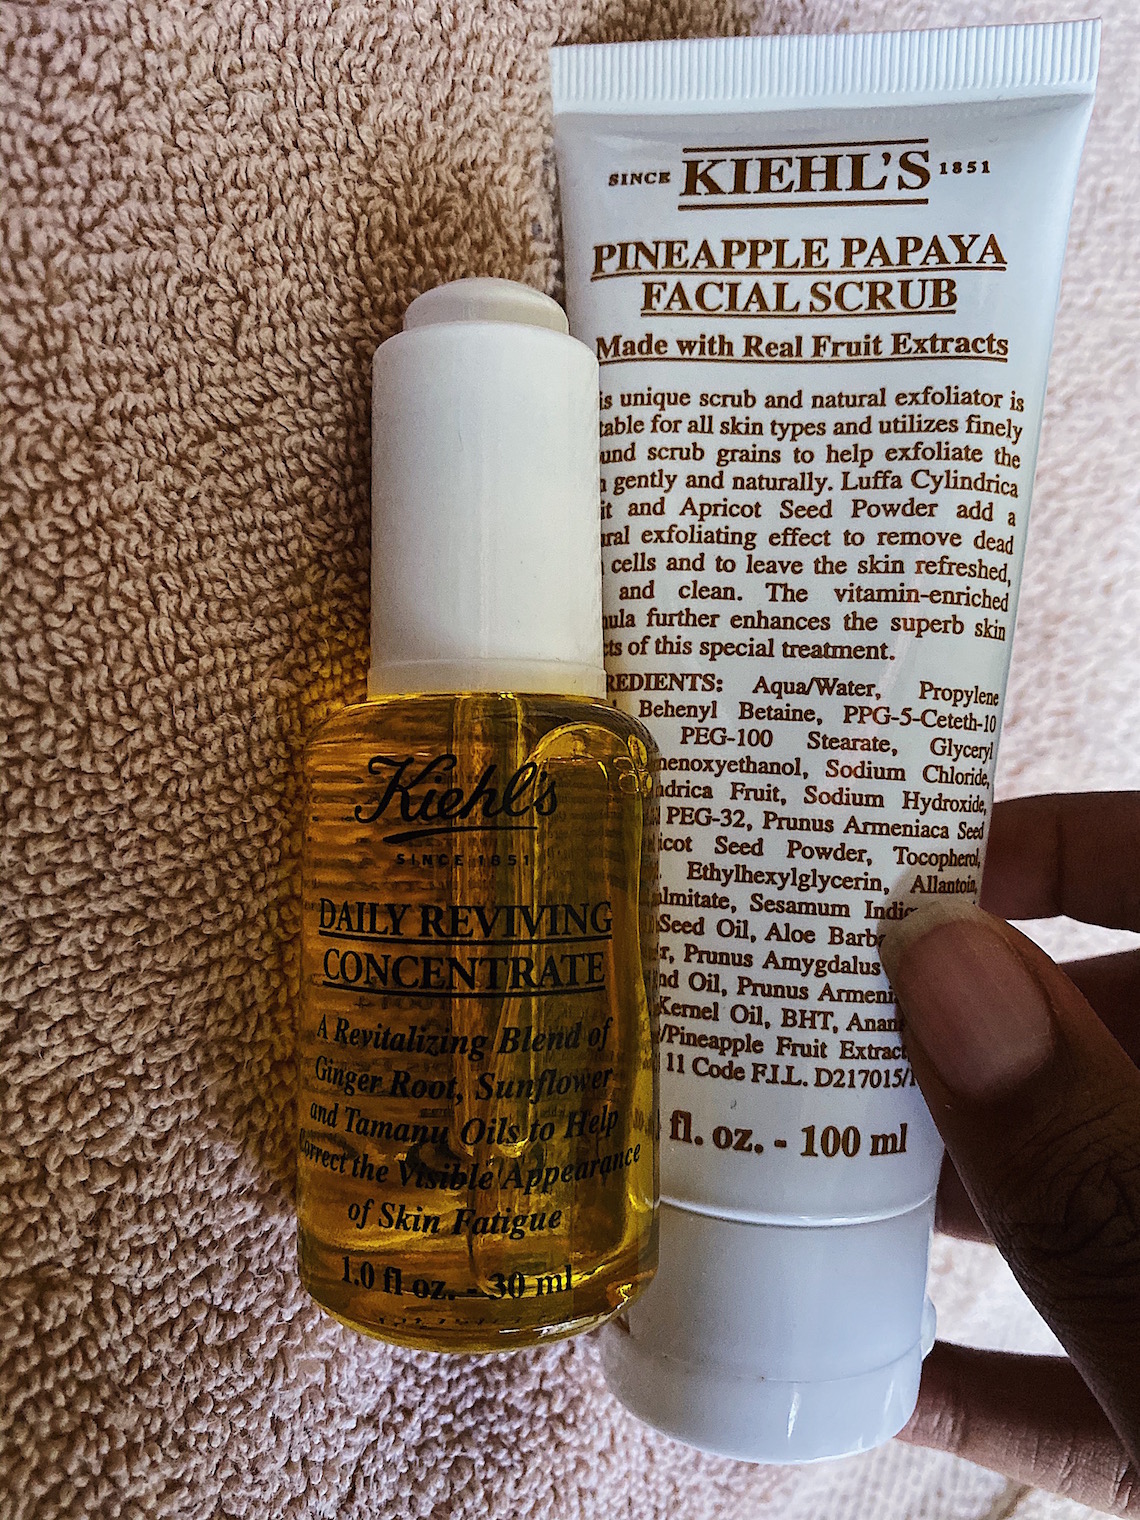 daily reviving concentrate-pineapple papaya facial scrub-kiehls-products for combination skin